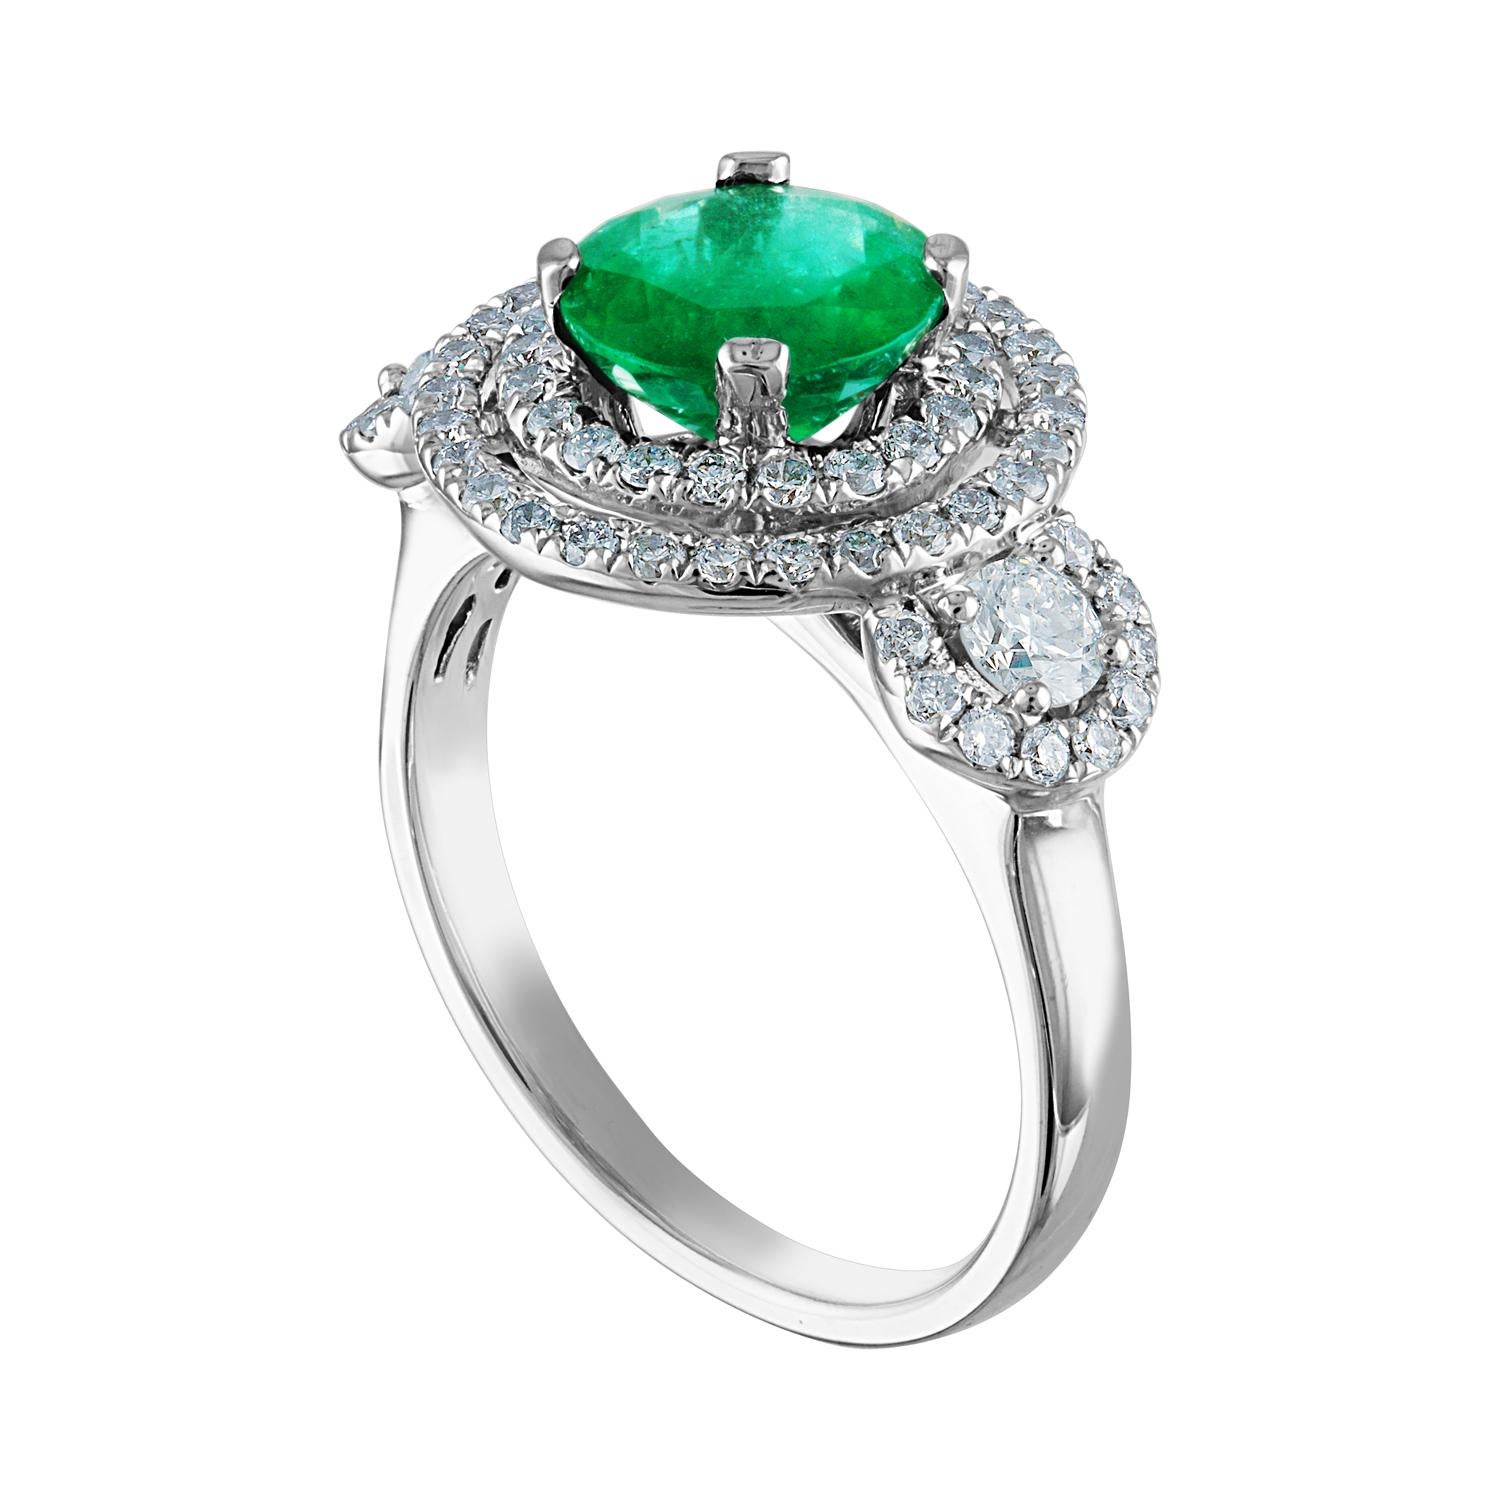 Beautiful Double Halo Emerald Ring
The ring is 18K White Gold.
The Center is a beautiful round cut 1.51 Carat Emerald.
The Emerald is AGL certified.
There are 0.82 Carats in Diamonds F/G VS/SI
The ring is a size 7.00, sizable.
The ring weighs 5.7